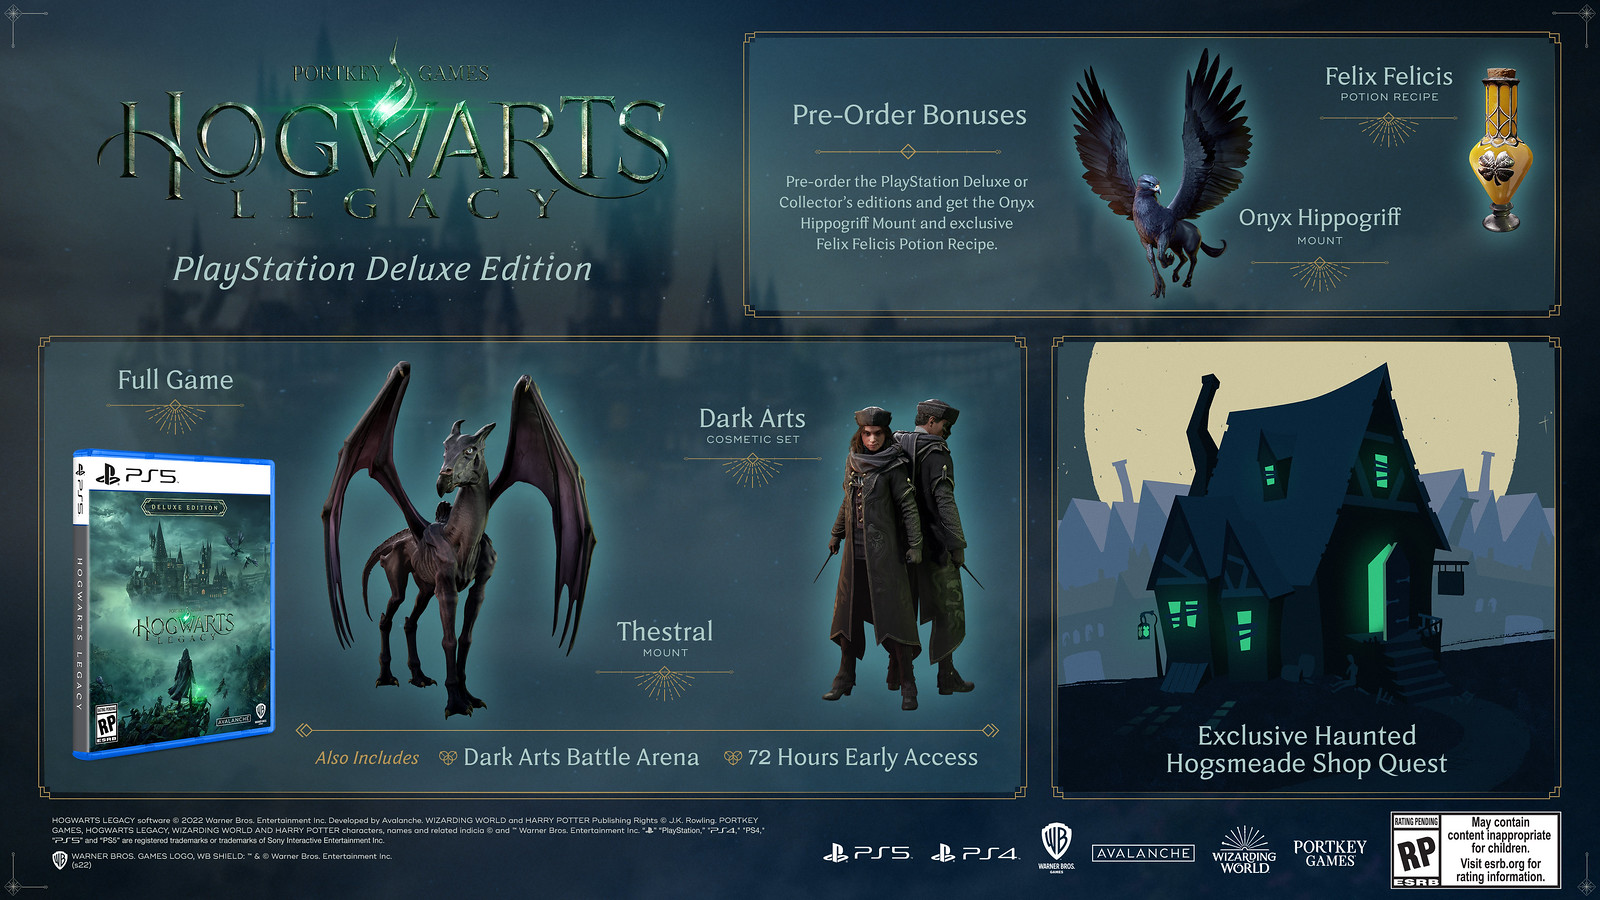 The PlayStation Deluxe Edition includes the full game, Thestral mount and Dark Arts cosmetic set, as well as the Dark Arts Battle Arena and 72 hours early access. Pre-order gets you the Onyx Hippogriff Mount and the exclusive Felix Felicis Potion Recipe. You'll also get the exclusive Haunted Hogsmeade Shop Quest.